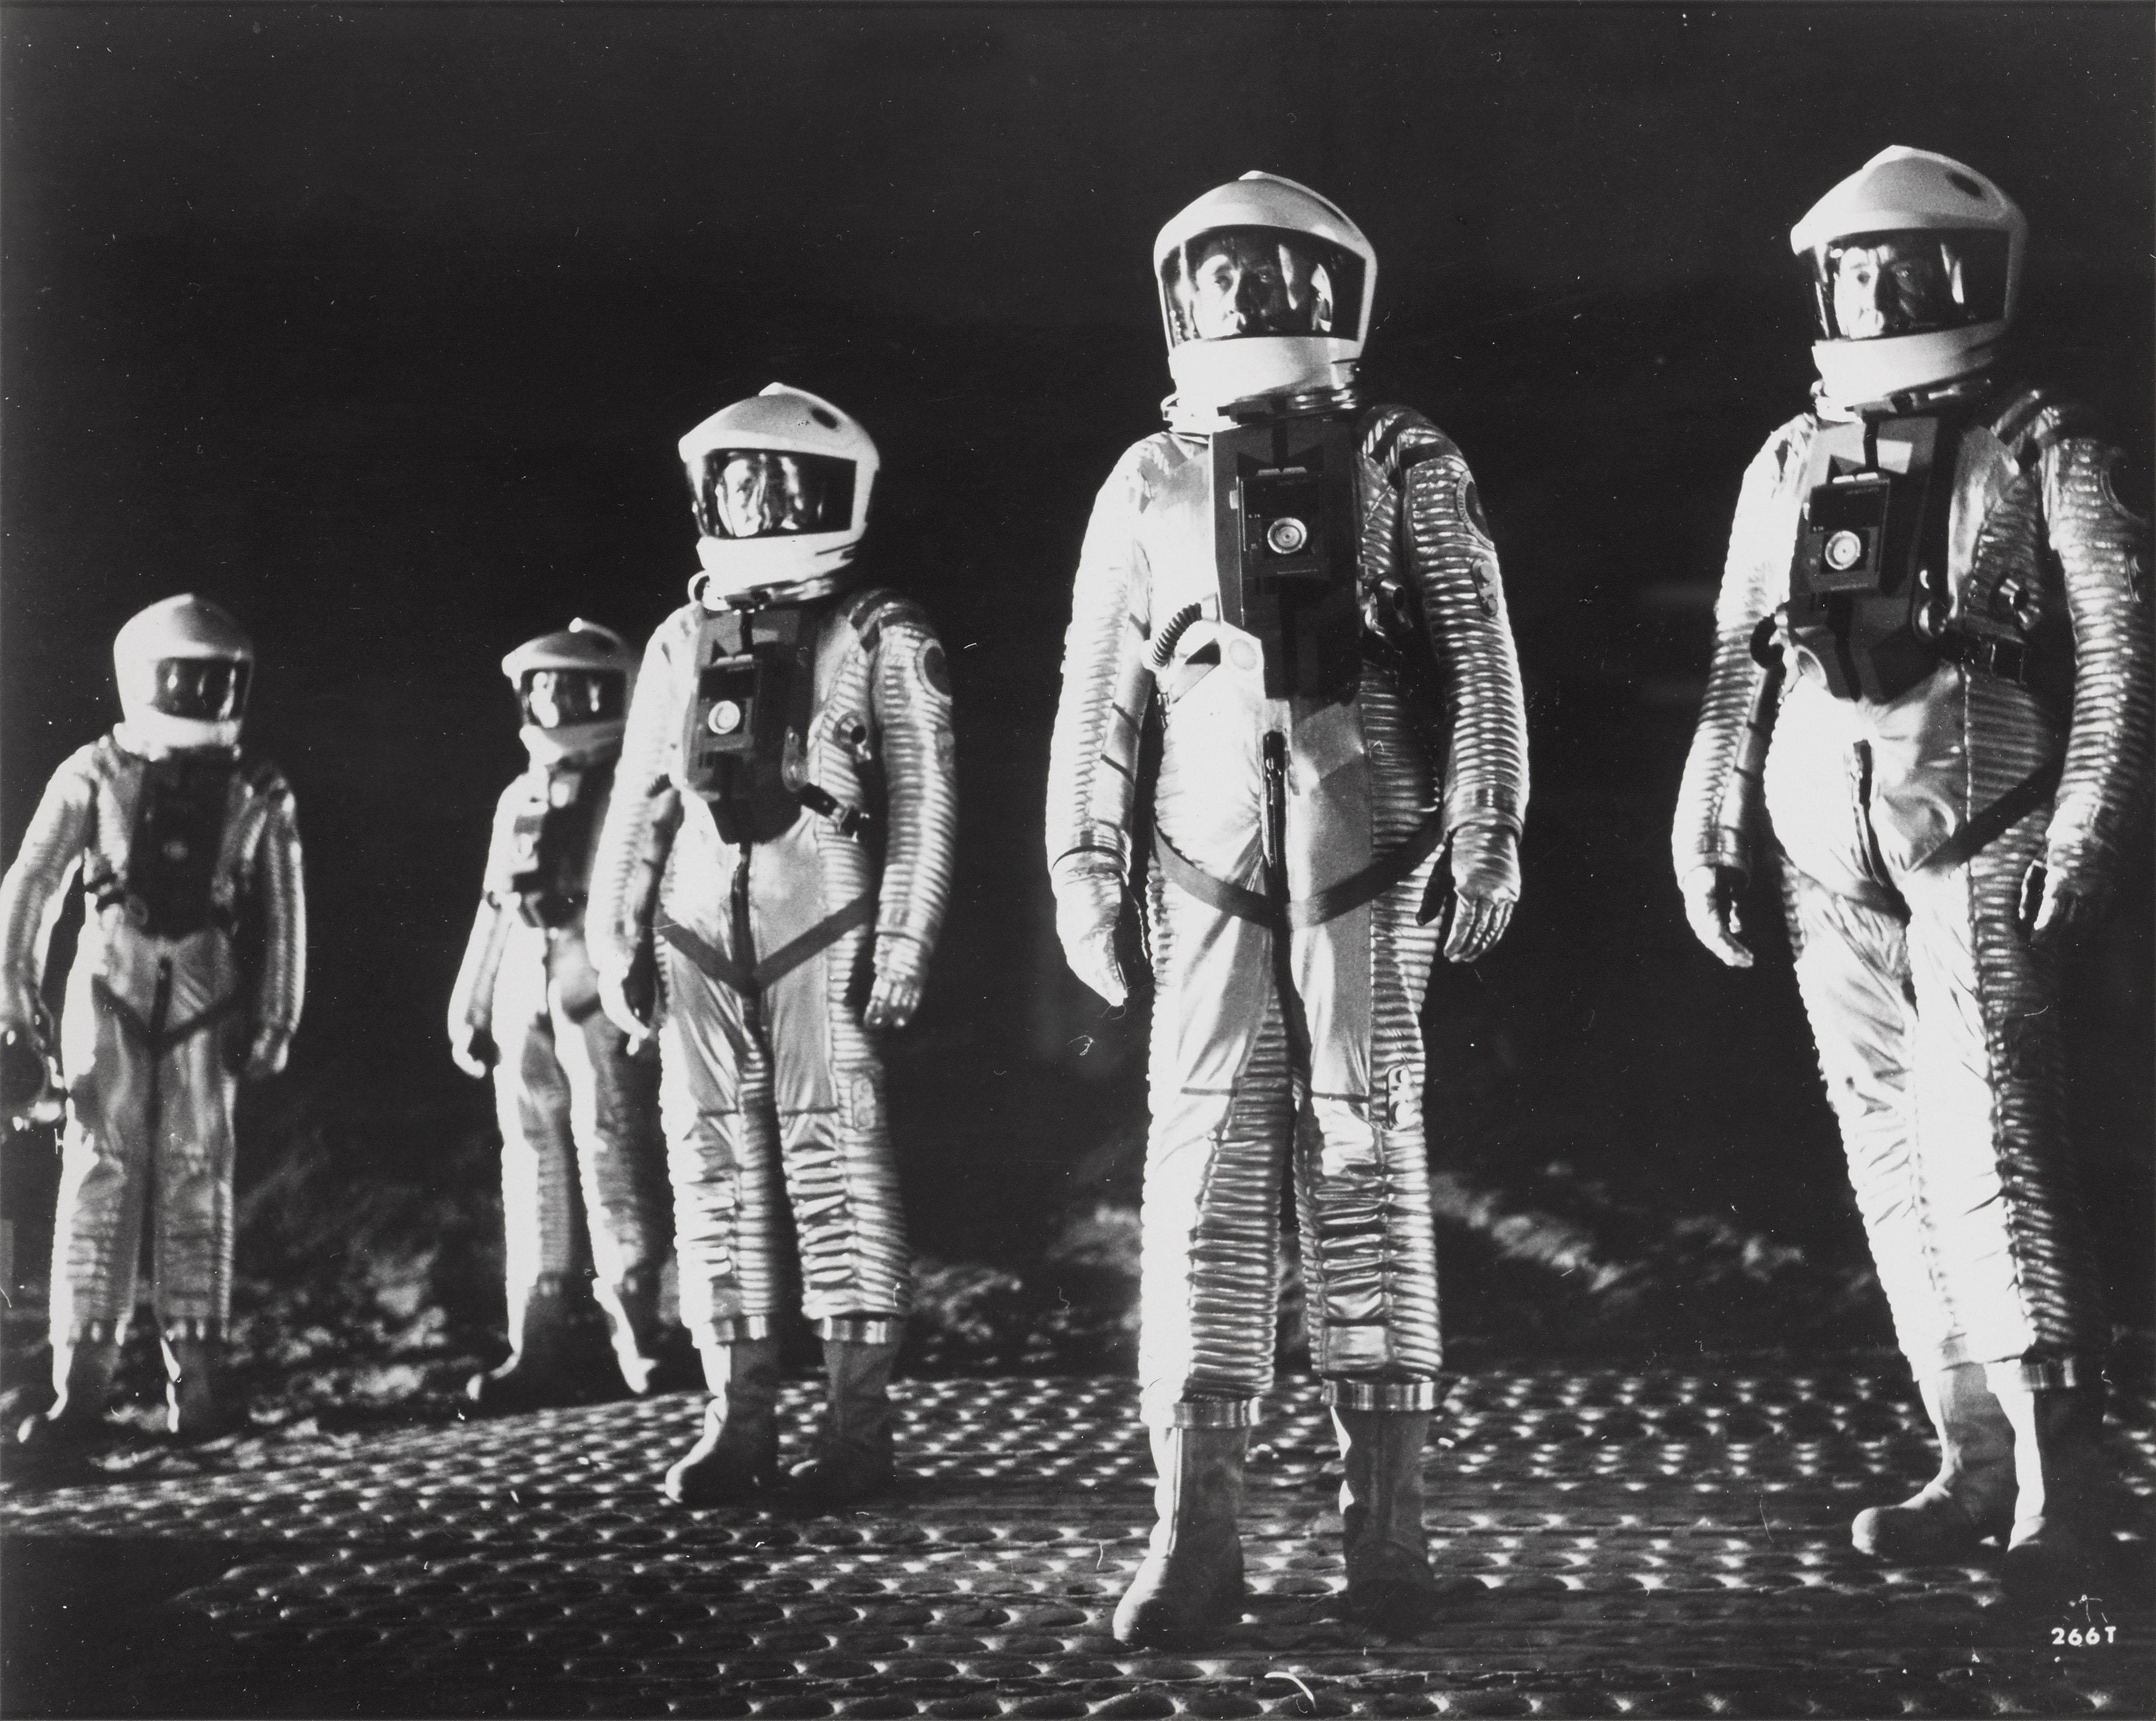 Original photographic production still for Stanley Kubrick's landmark science fiction film that is still considered one of the most influential sci-fi films of all time.
On the reverse of the piece is some original info sent out with the photo to